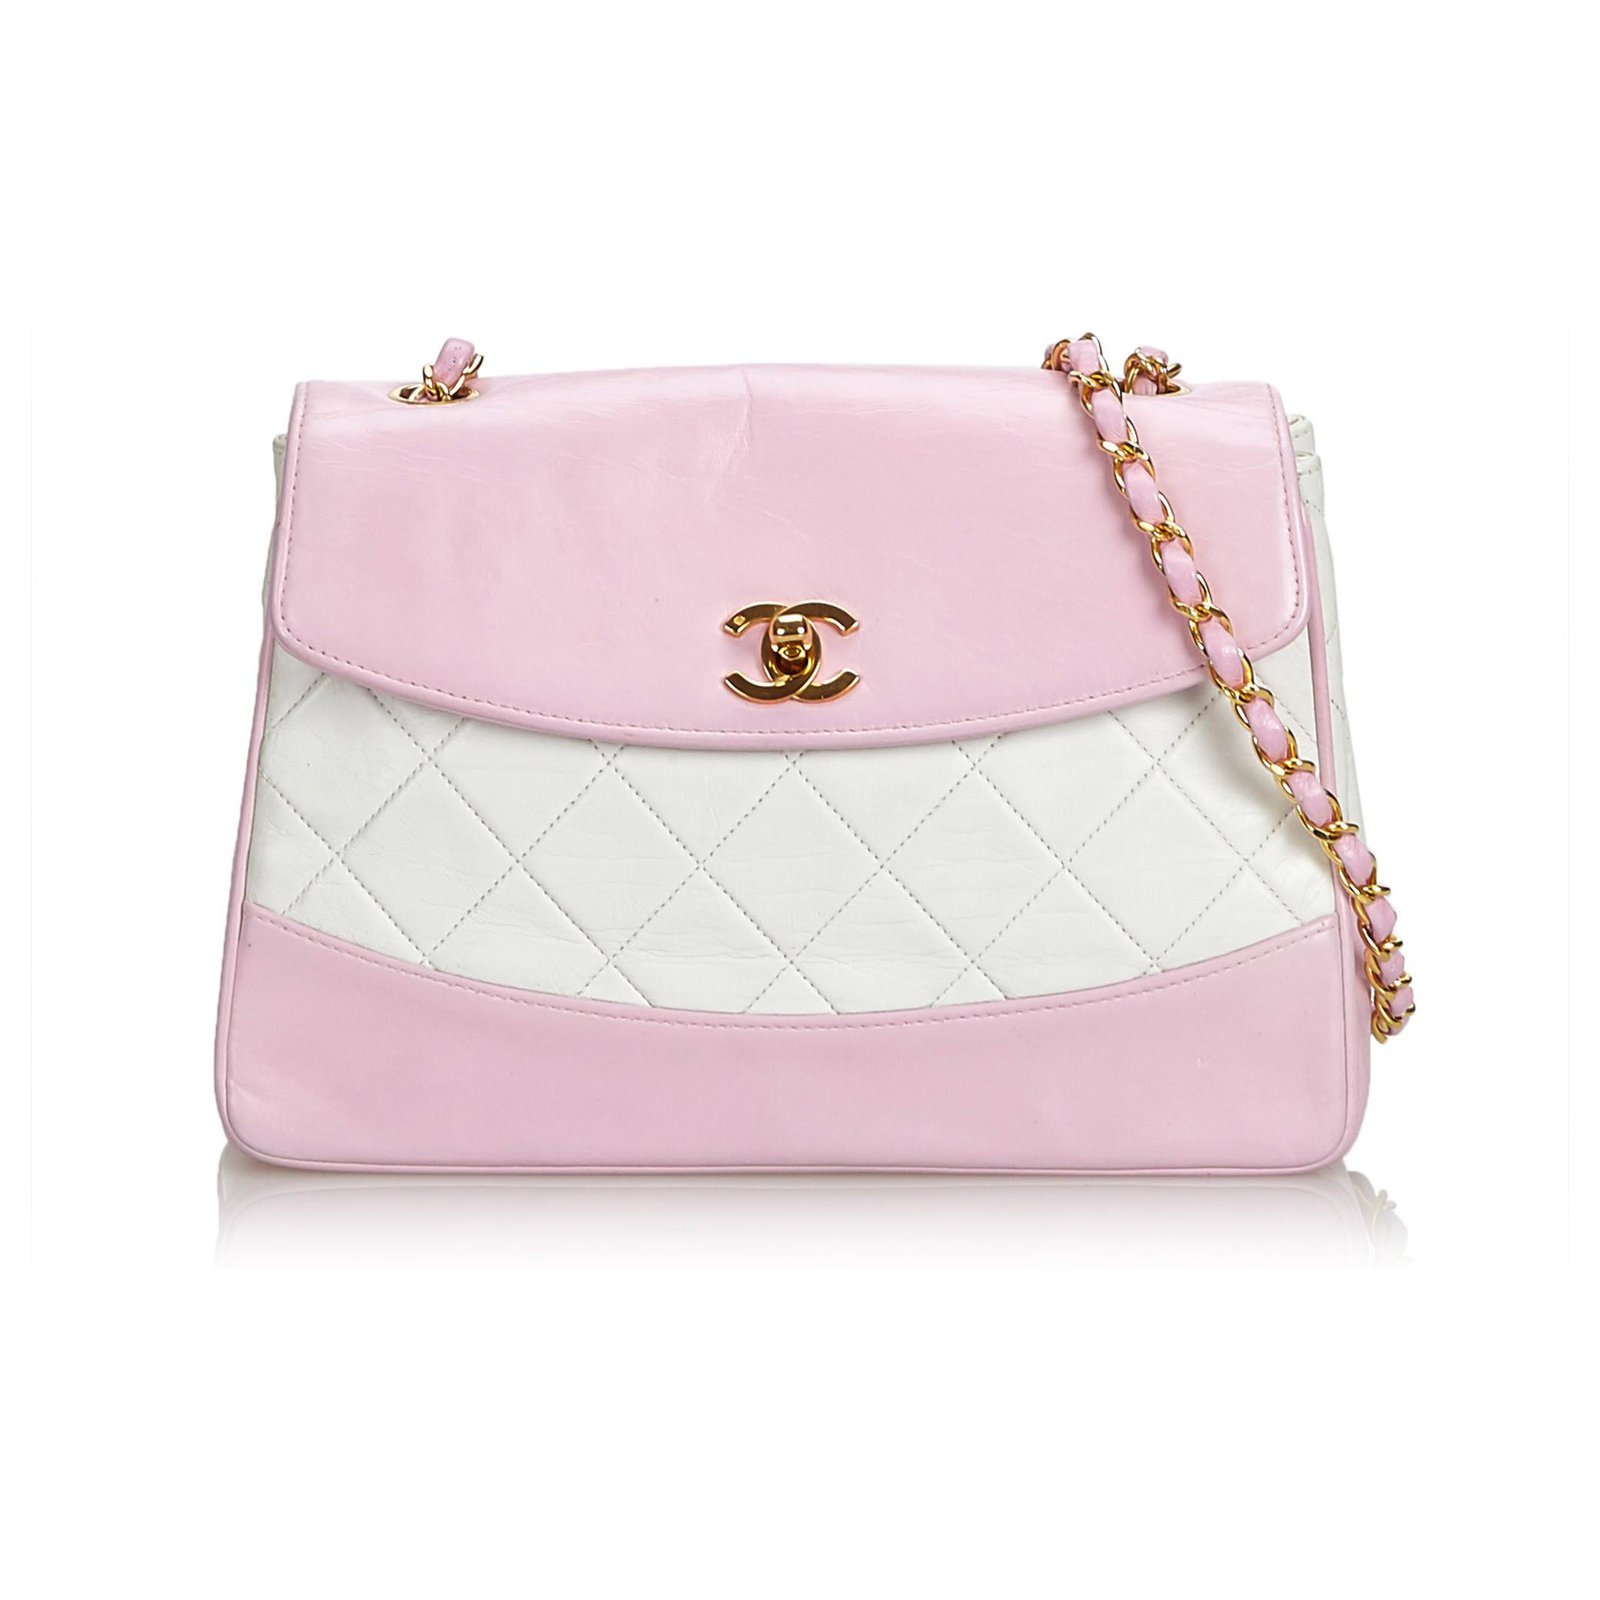 CHANEL Lambskin Quilted Medium Double Flap Light Pink 78567